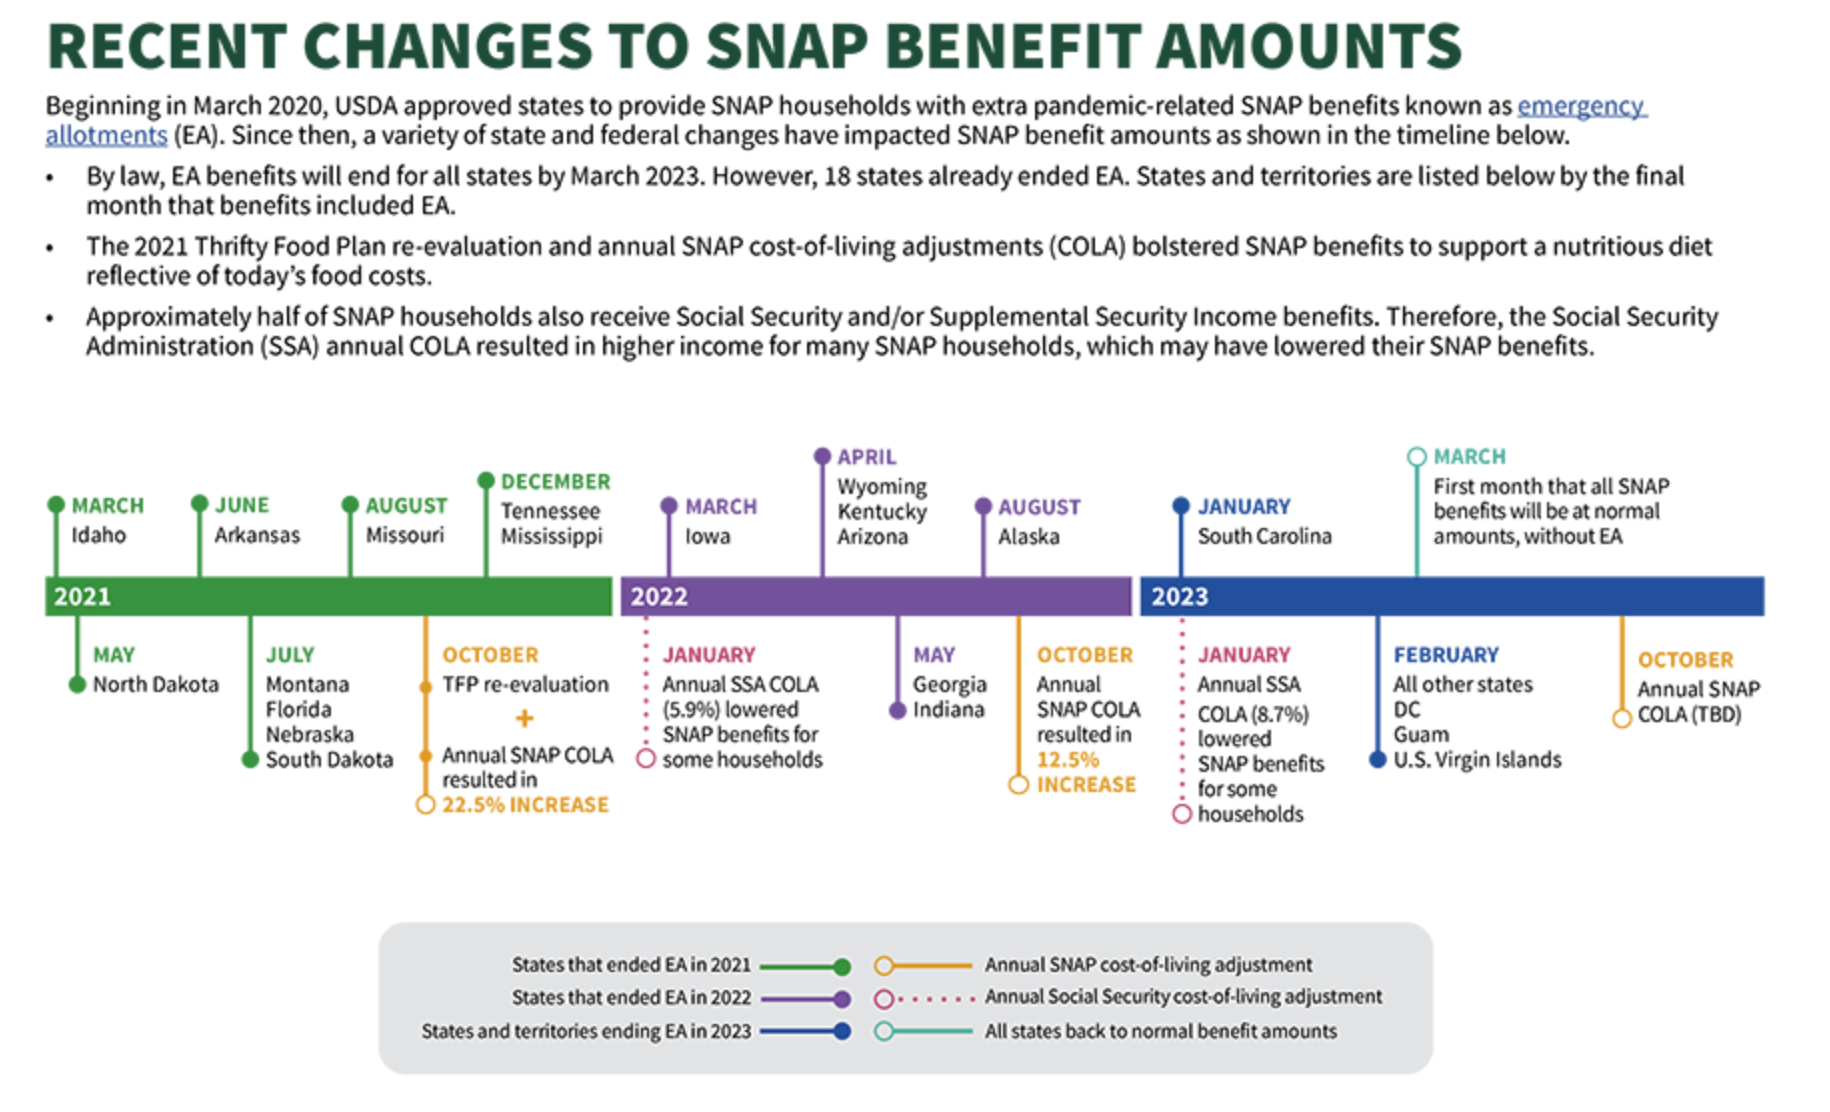 Changes to SNAP Benefits 2021-2023